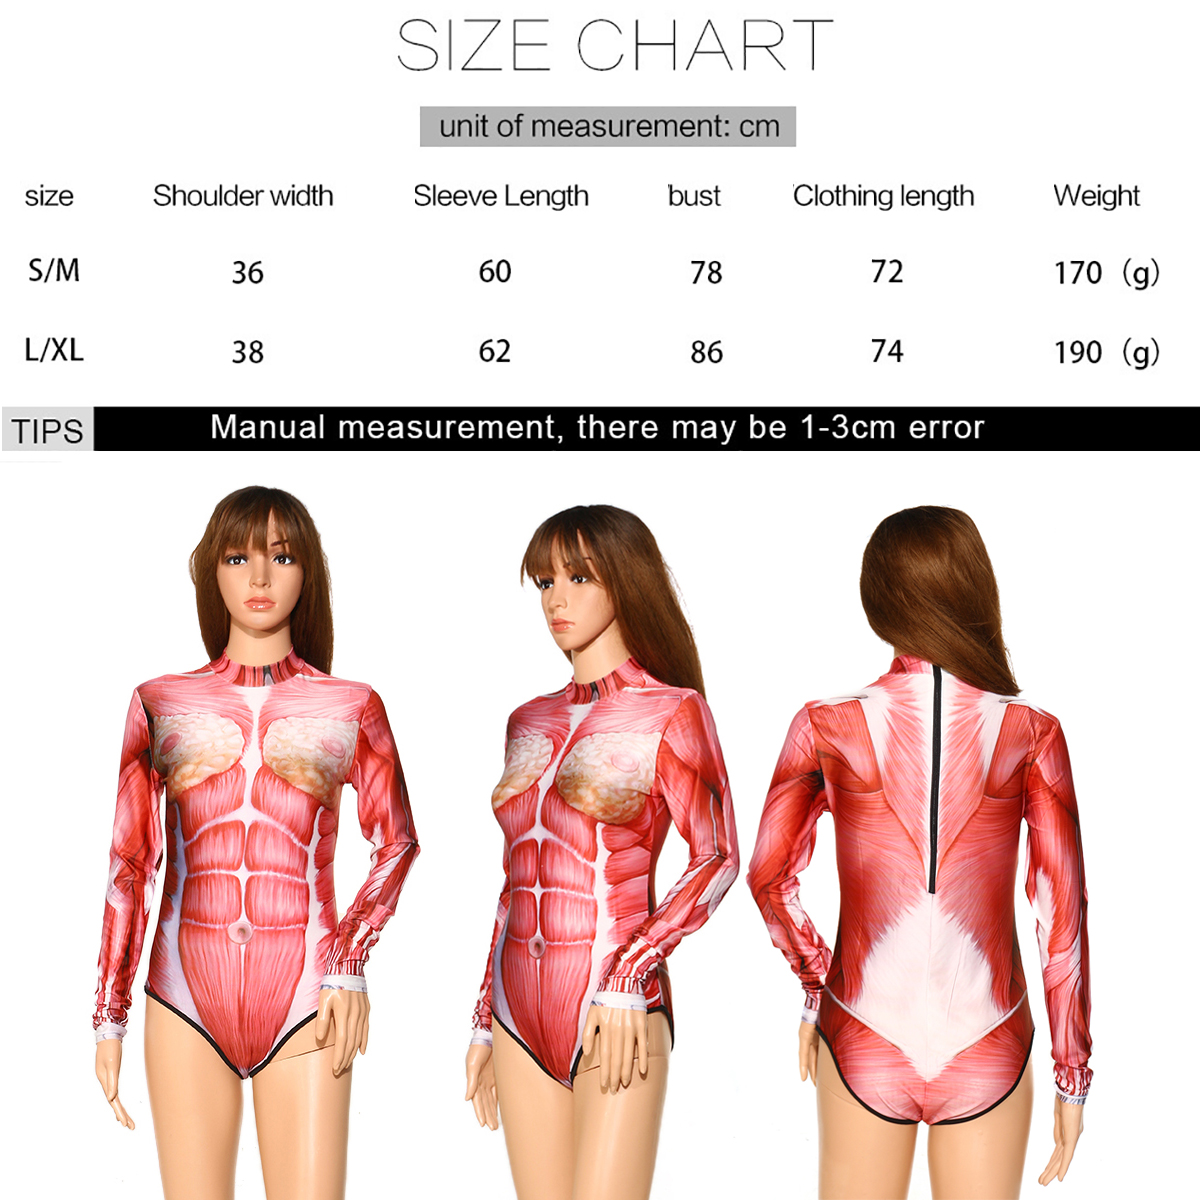 Womens-Human-Organs-Swimwear-Cosplay-Costume-Swimsuit-Bathing-Suit-Party-Clothes-1623848-4